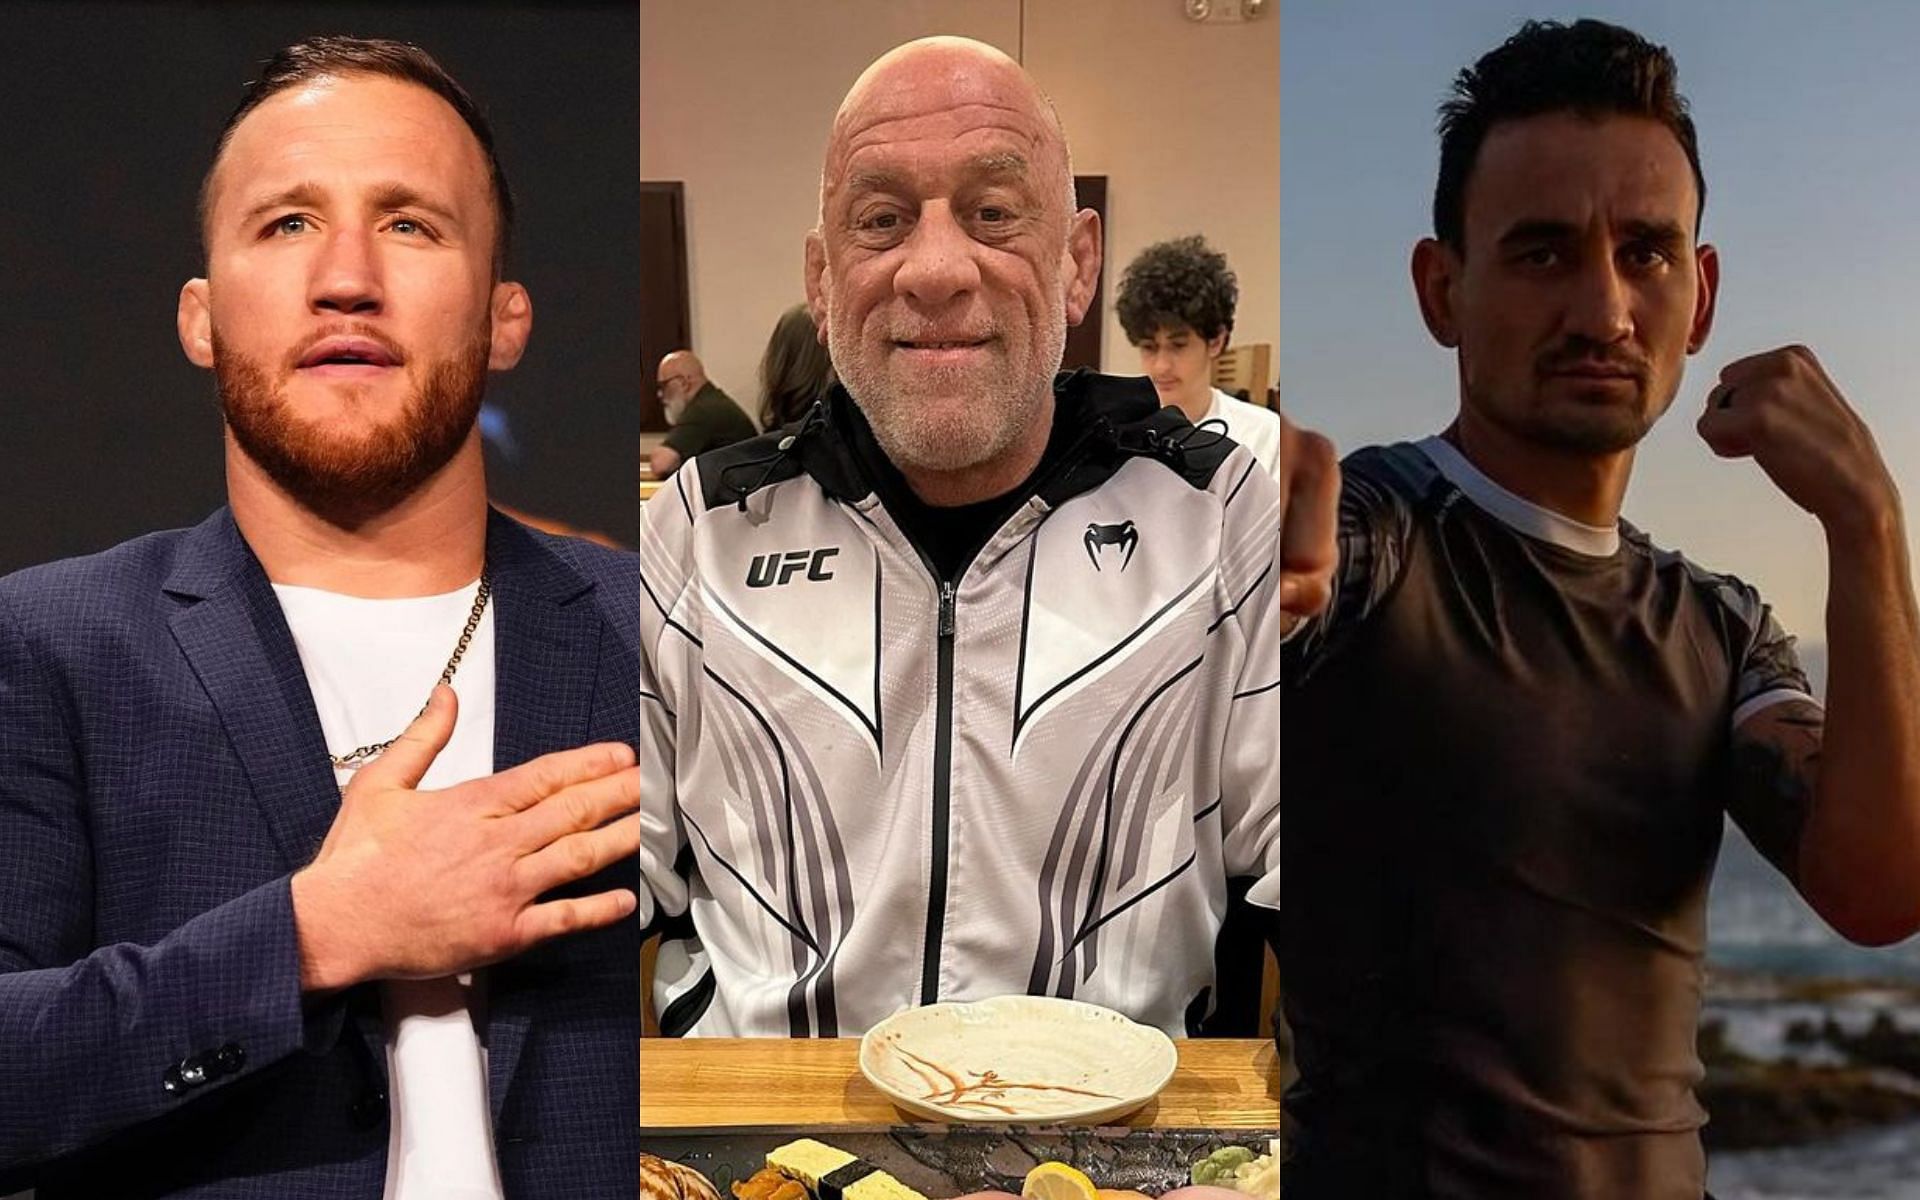 Justin Gaethje (left) and Max Holloway (right) hold Mark Coleman (middle) in high regard [Images courtesy: @justin_gaethje, @markcolemanufc, and @blessedmma on Instagram]